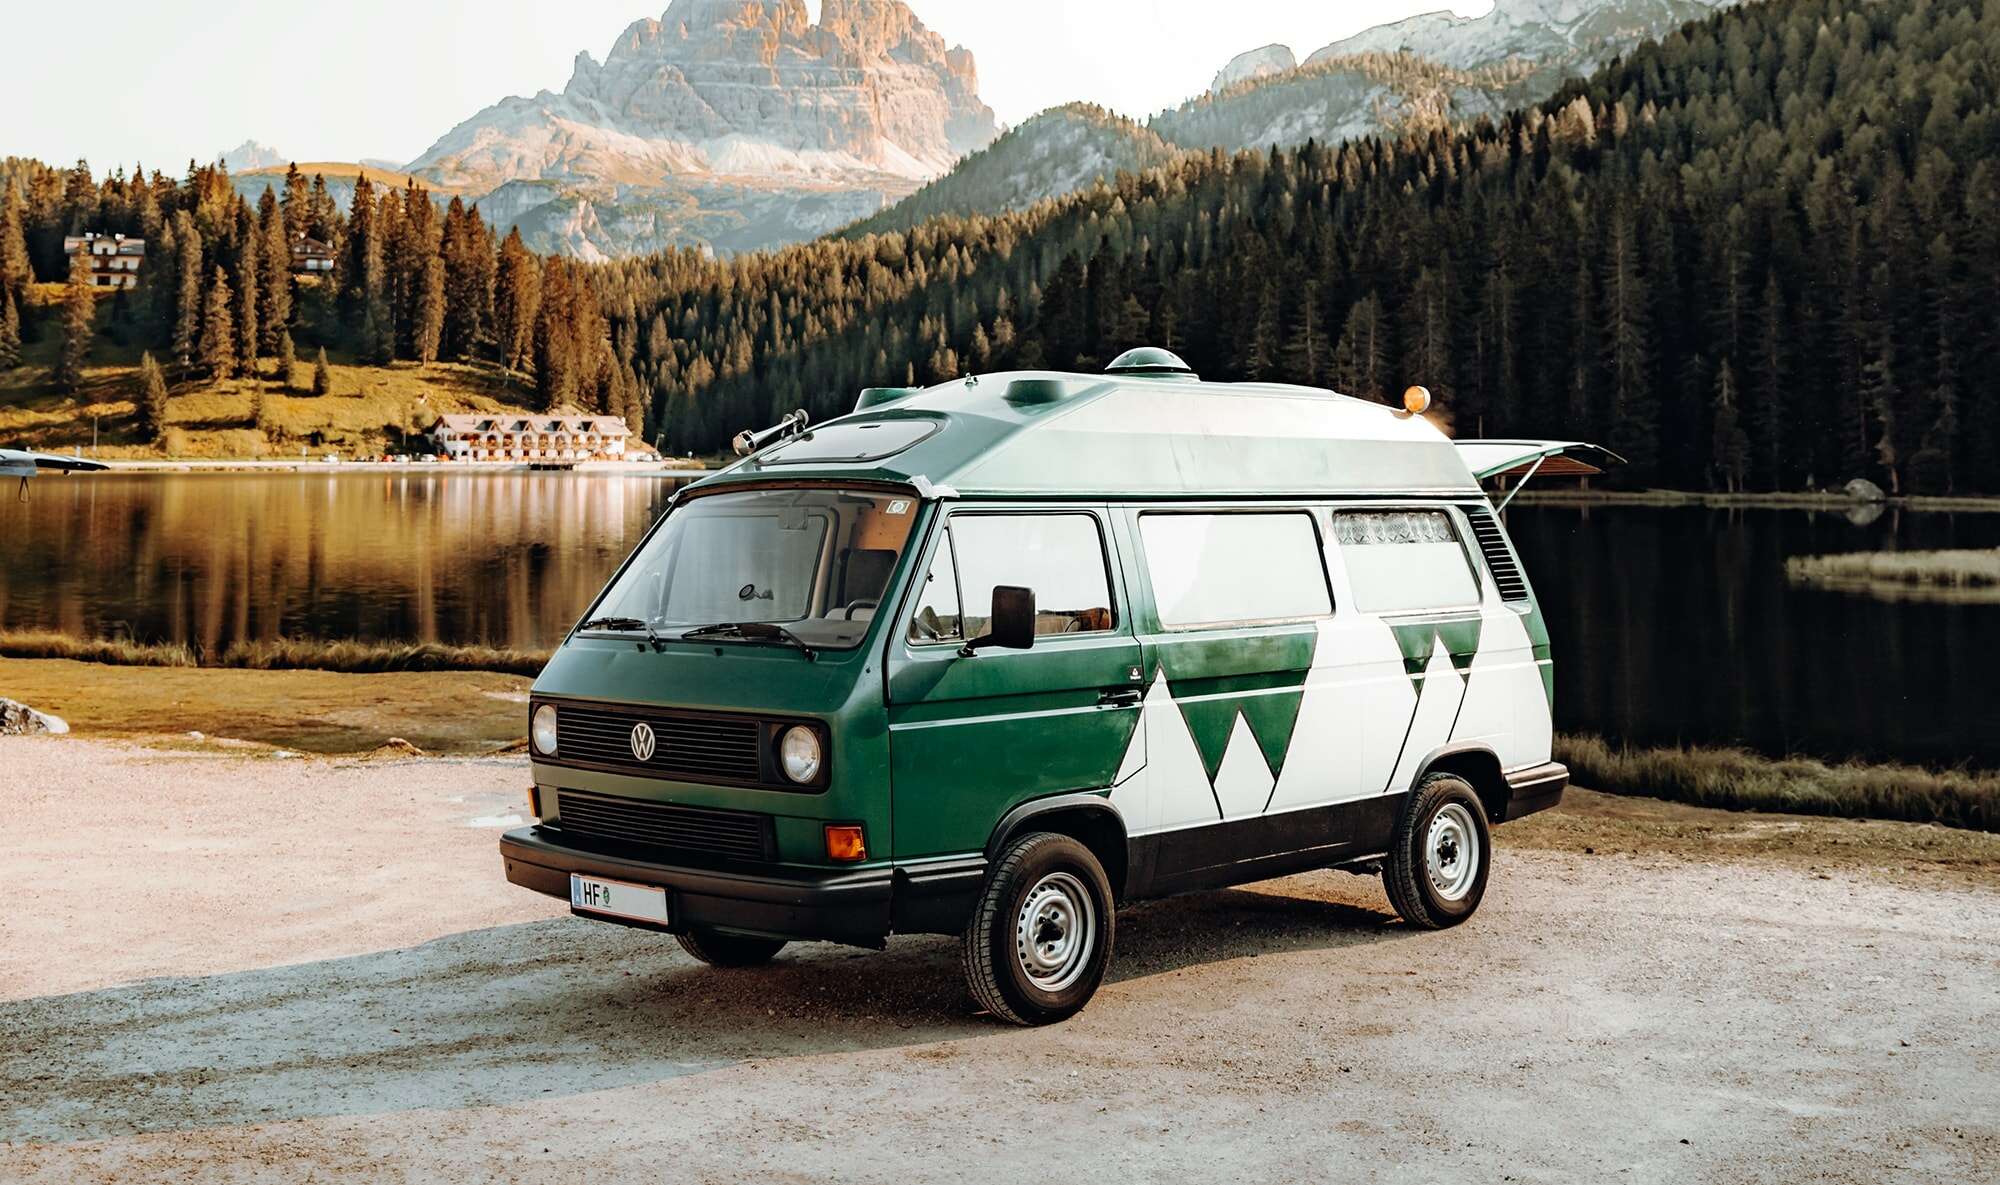 A green camper van parked in a park